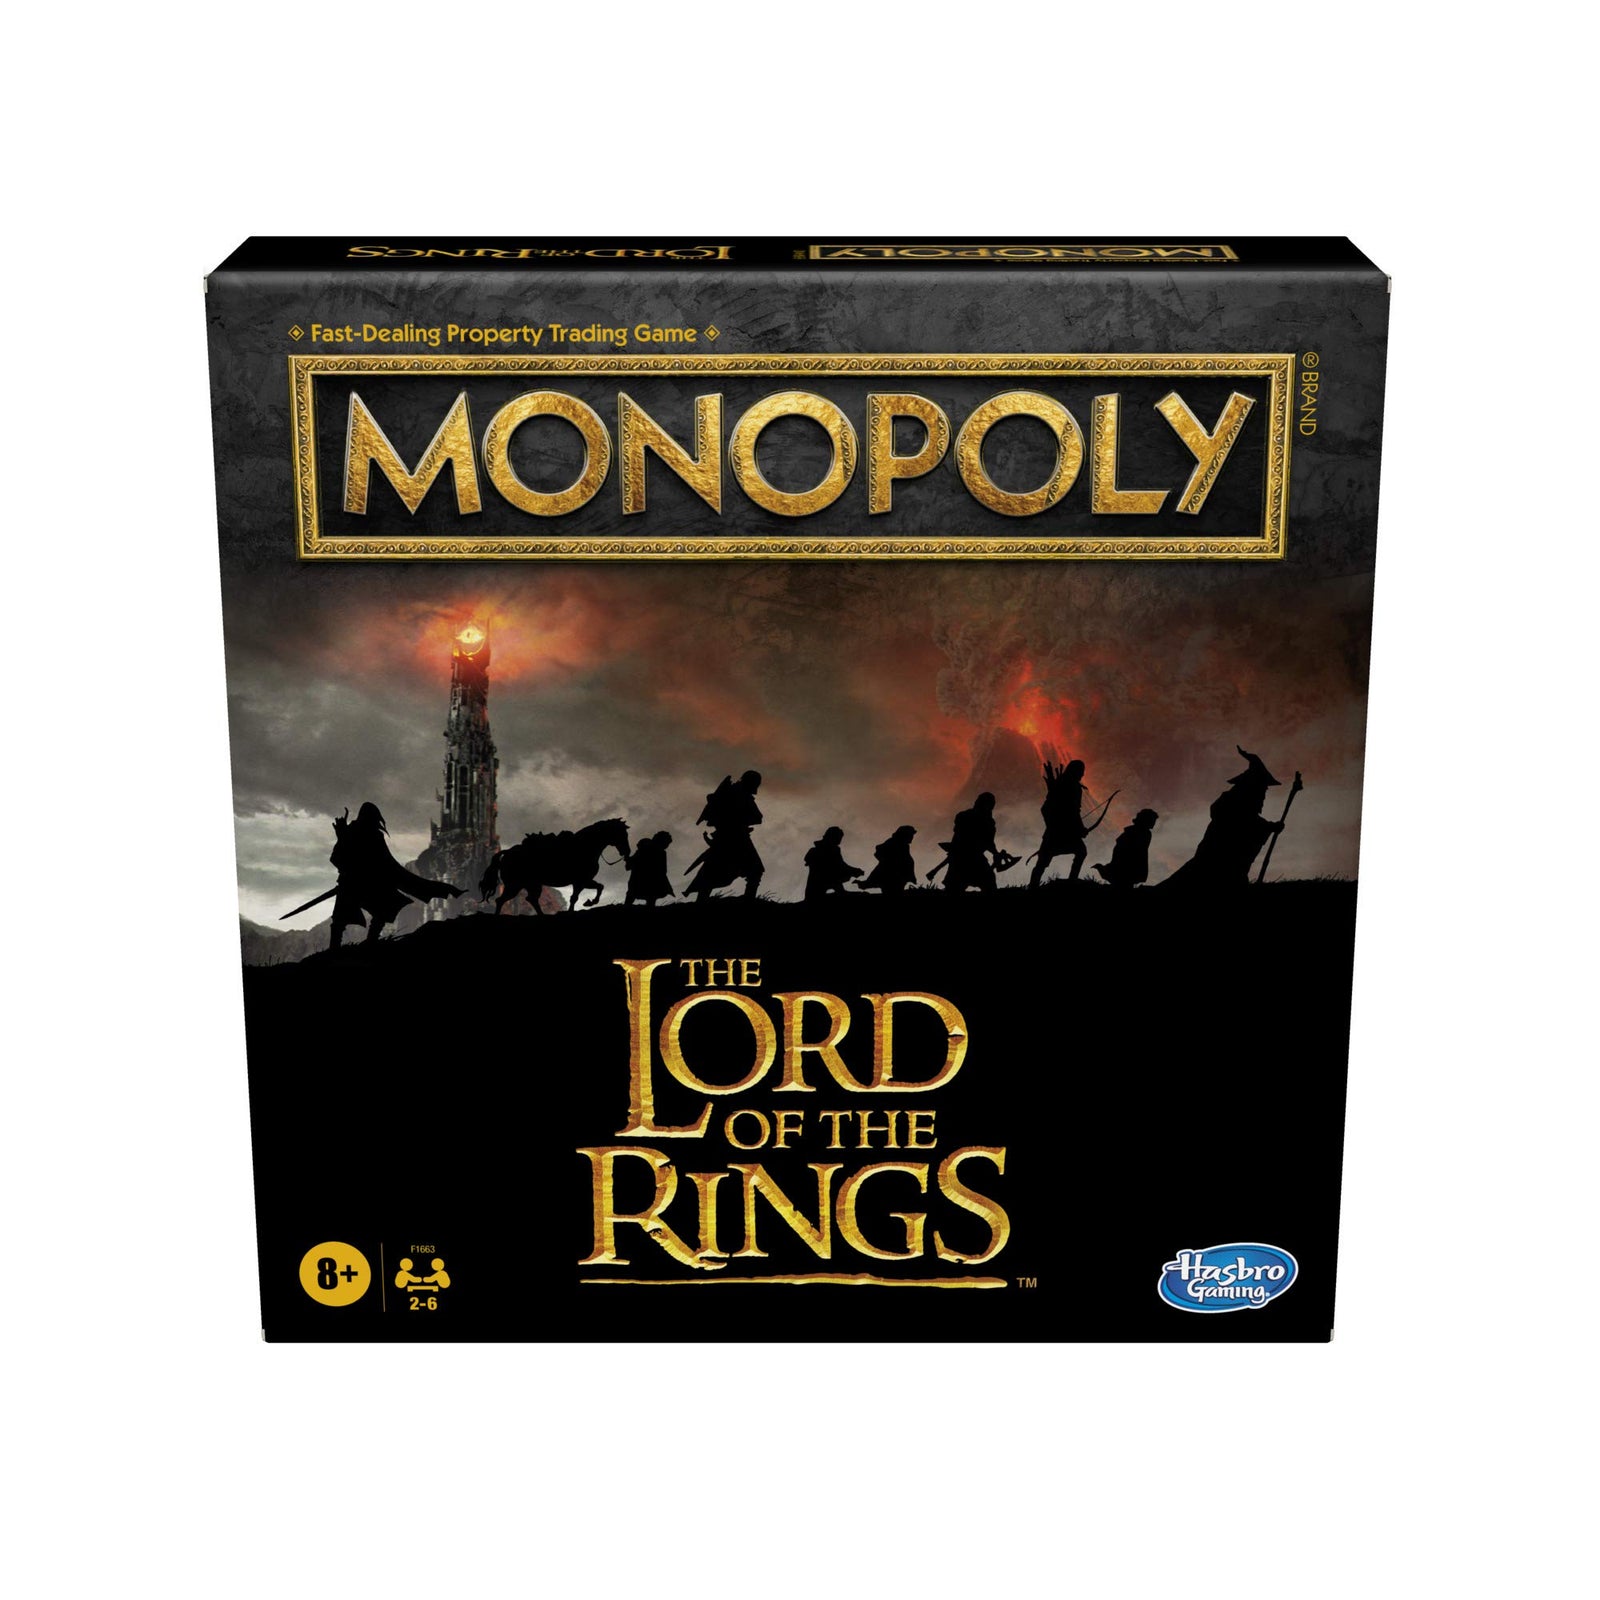 Hasbro Gaming Monopoly: The Lord of The Rings Edition Board Game Inspired by The Movie Trilogy, Play as a Member of The Fellowship, for Kids Ages 8 and Up (Amazon Exclusive)